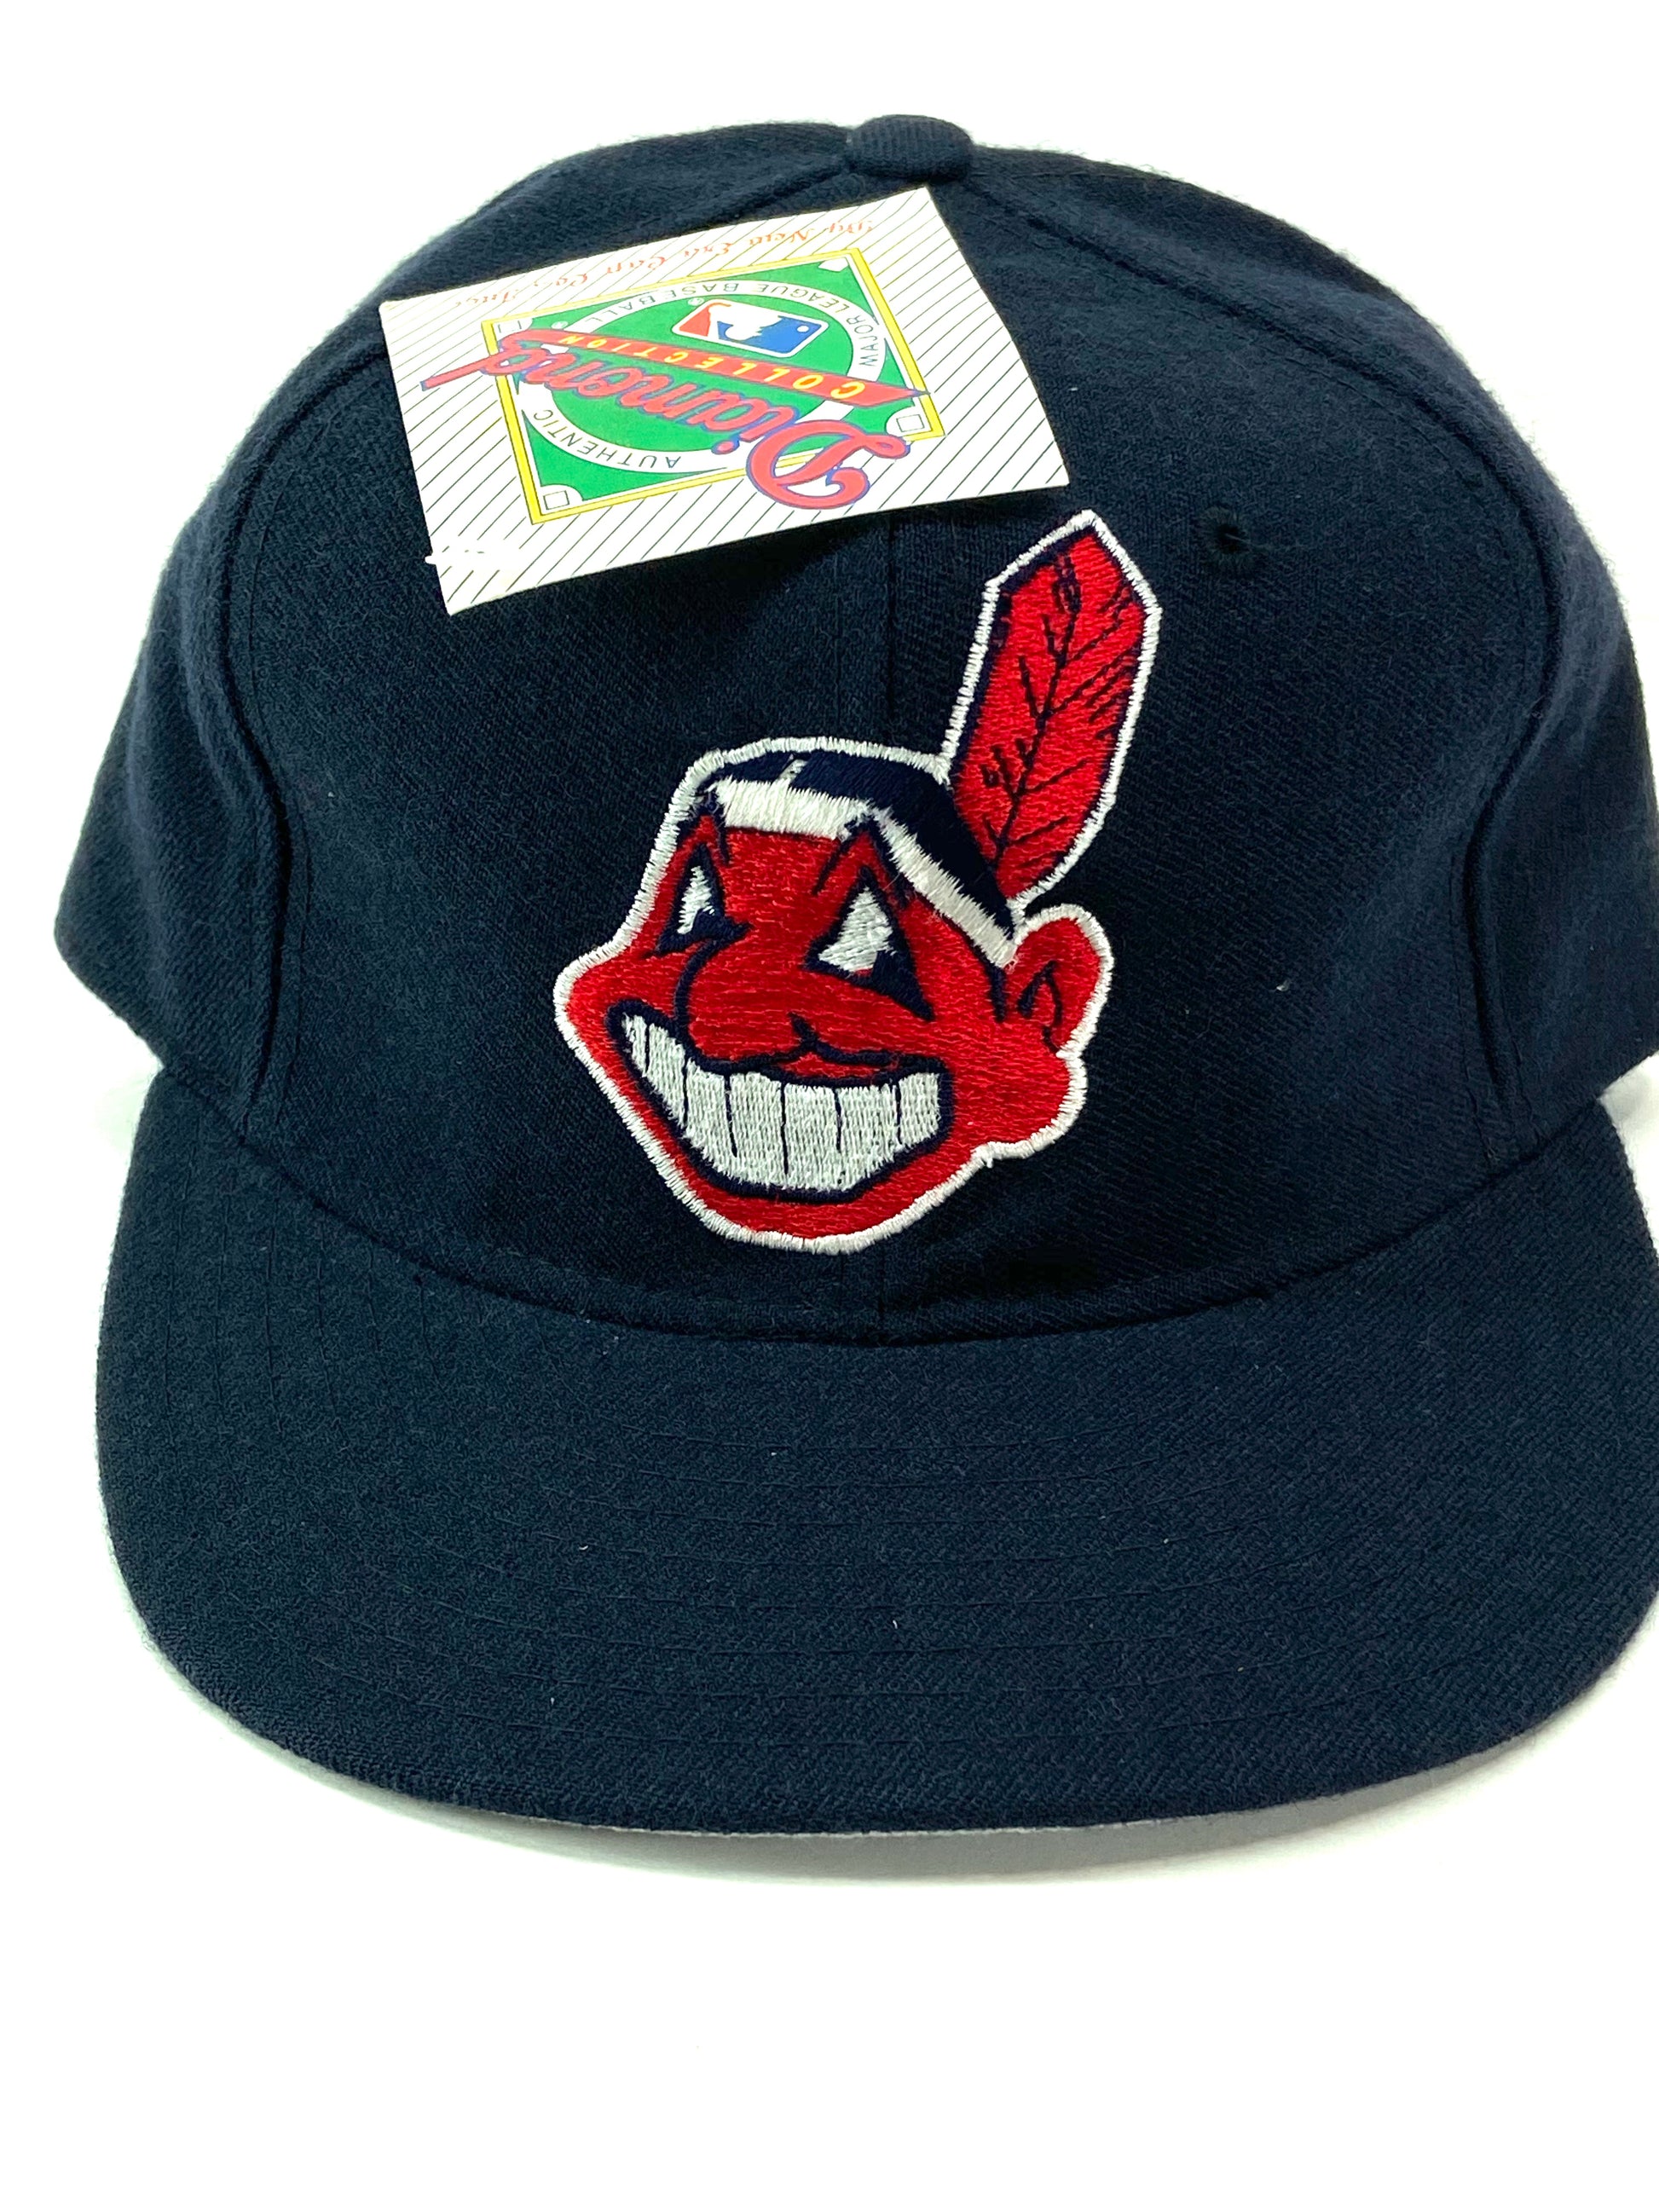 Cleveland Indians New Era Home Authentic Collection Chief Wahoo